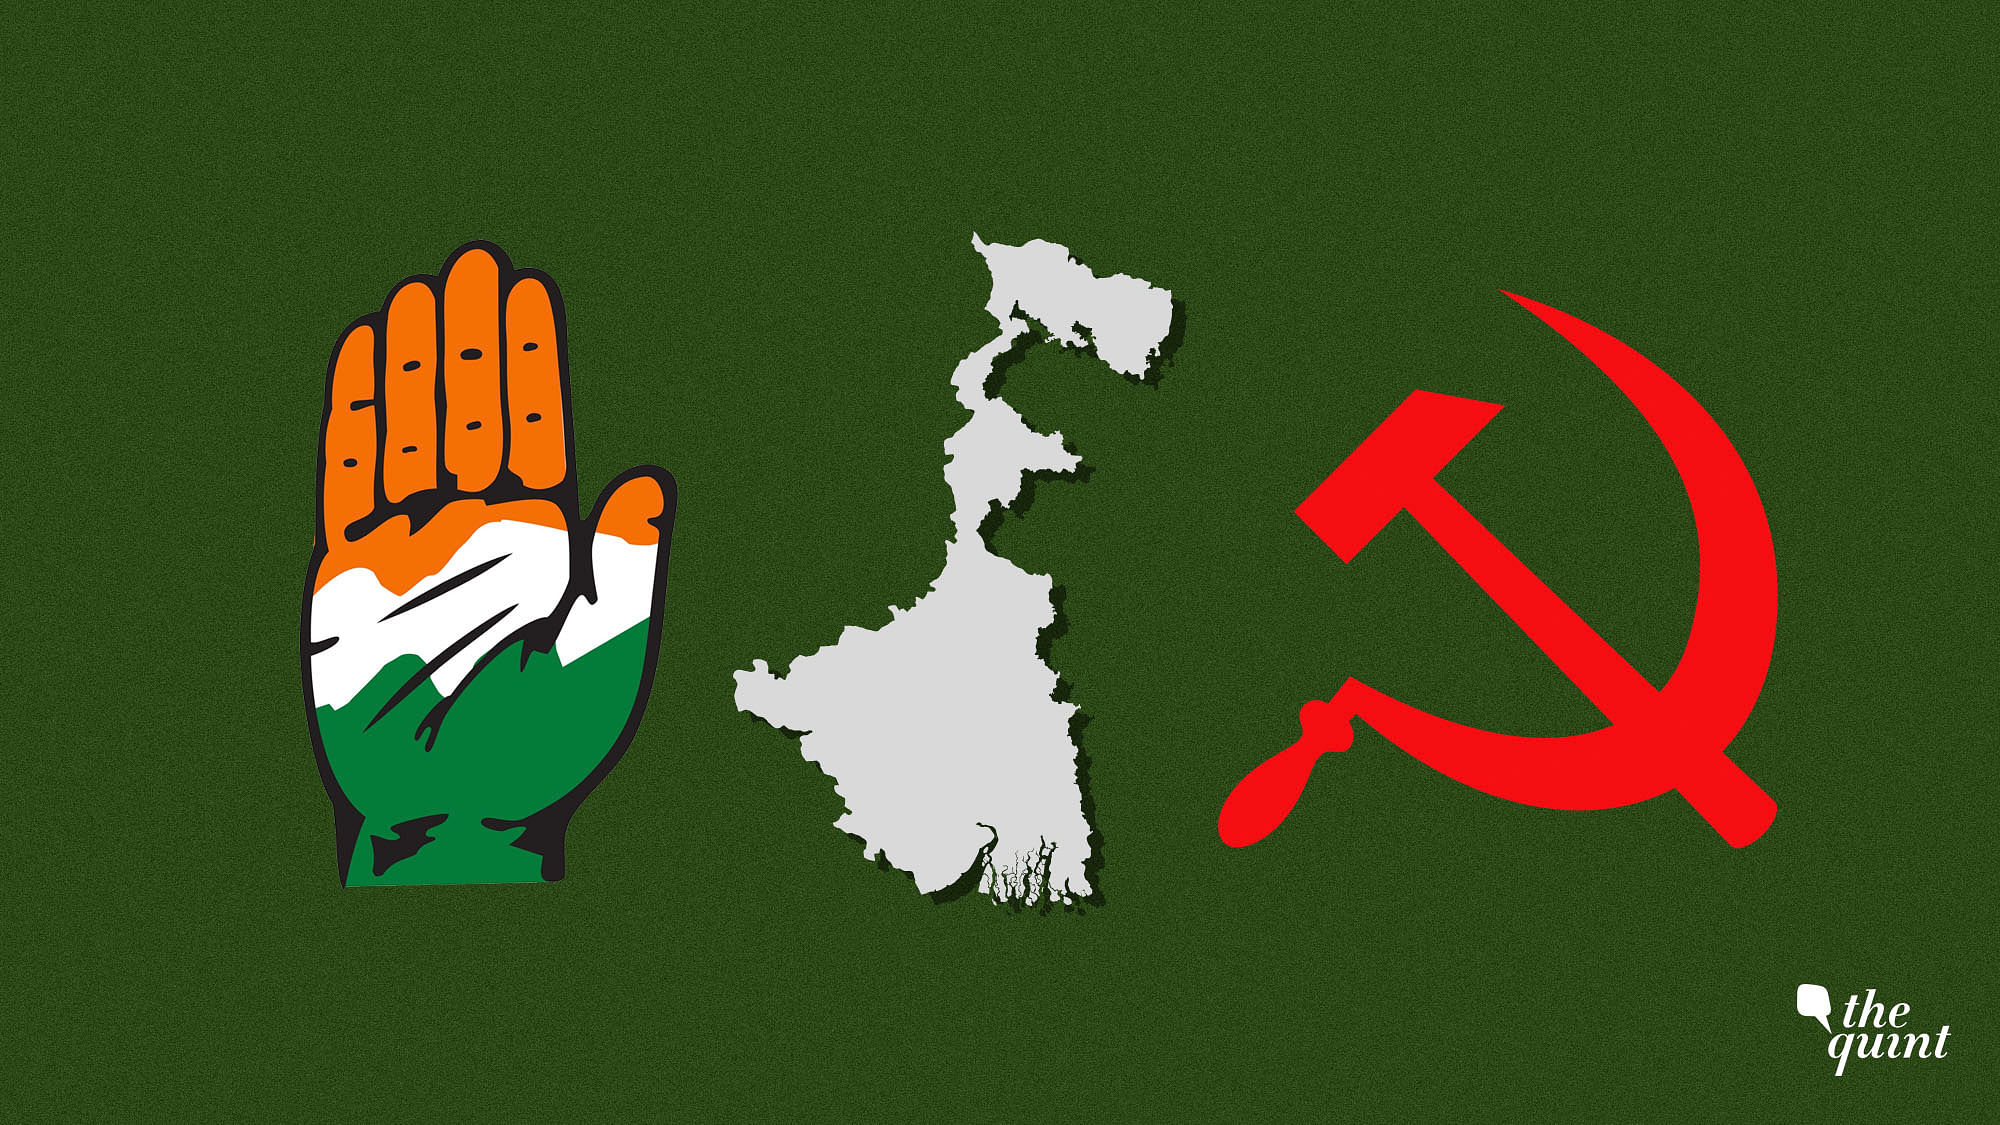 The Left-Congress alliance in Bengal is riddle with challenges.